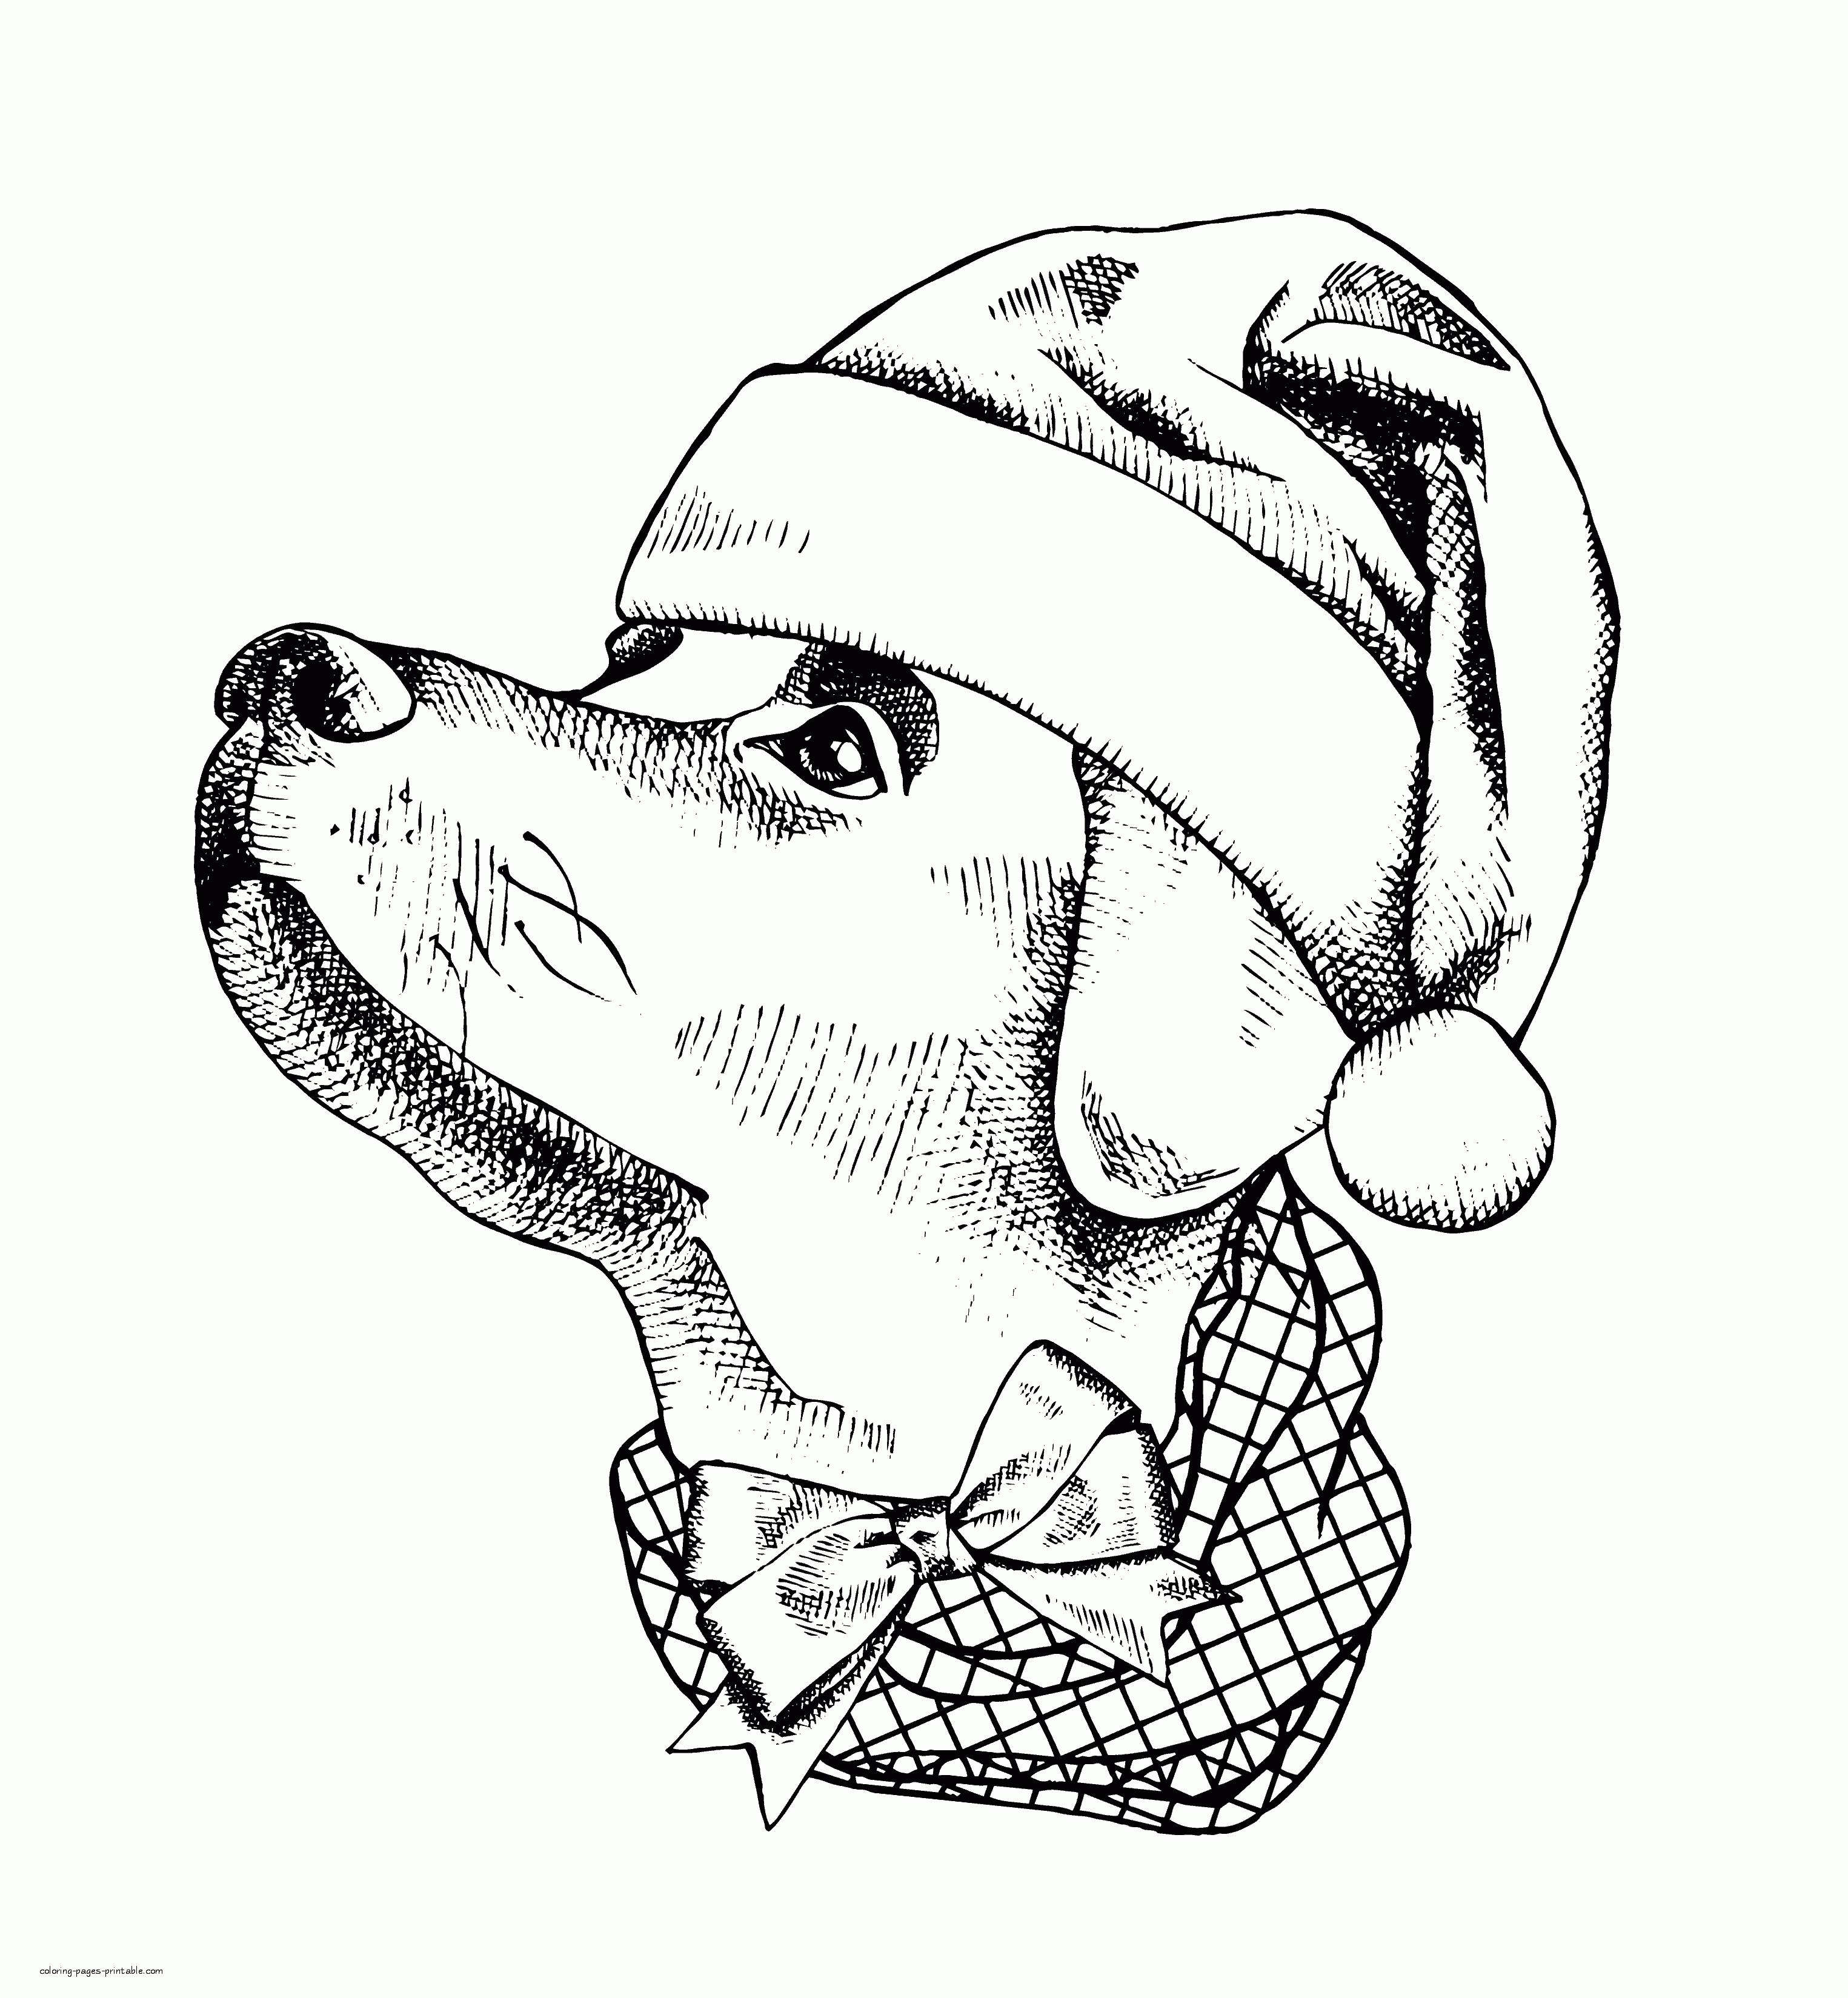 Real Dog Coloring Page For Adult    COLORING PAGES PRINTABLE.COM ...